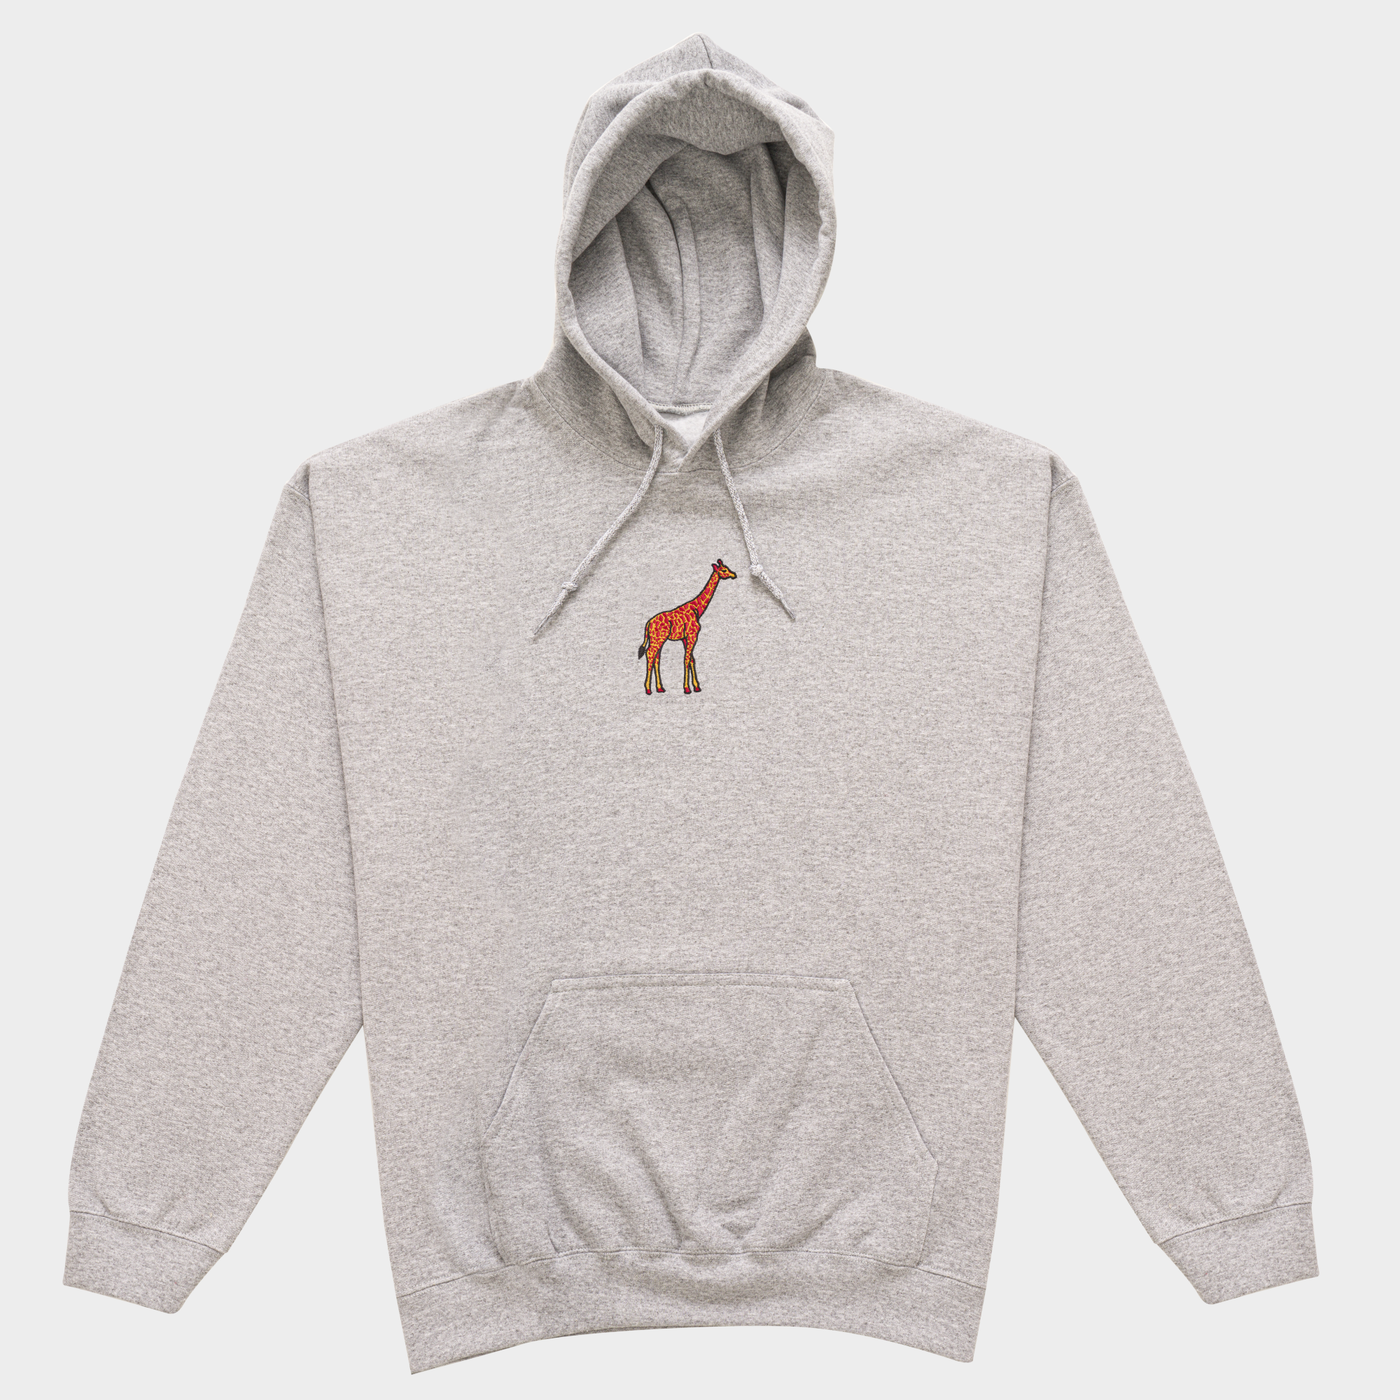 Bobby's Planet Men's Embroidered Giraffe Hoodie from African Animals Collection in Sport Grey Color#color_sport-grey